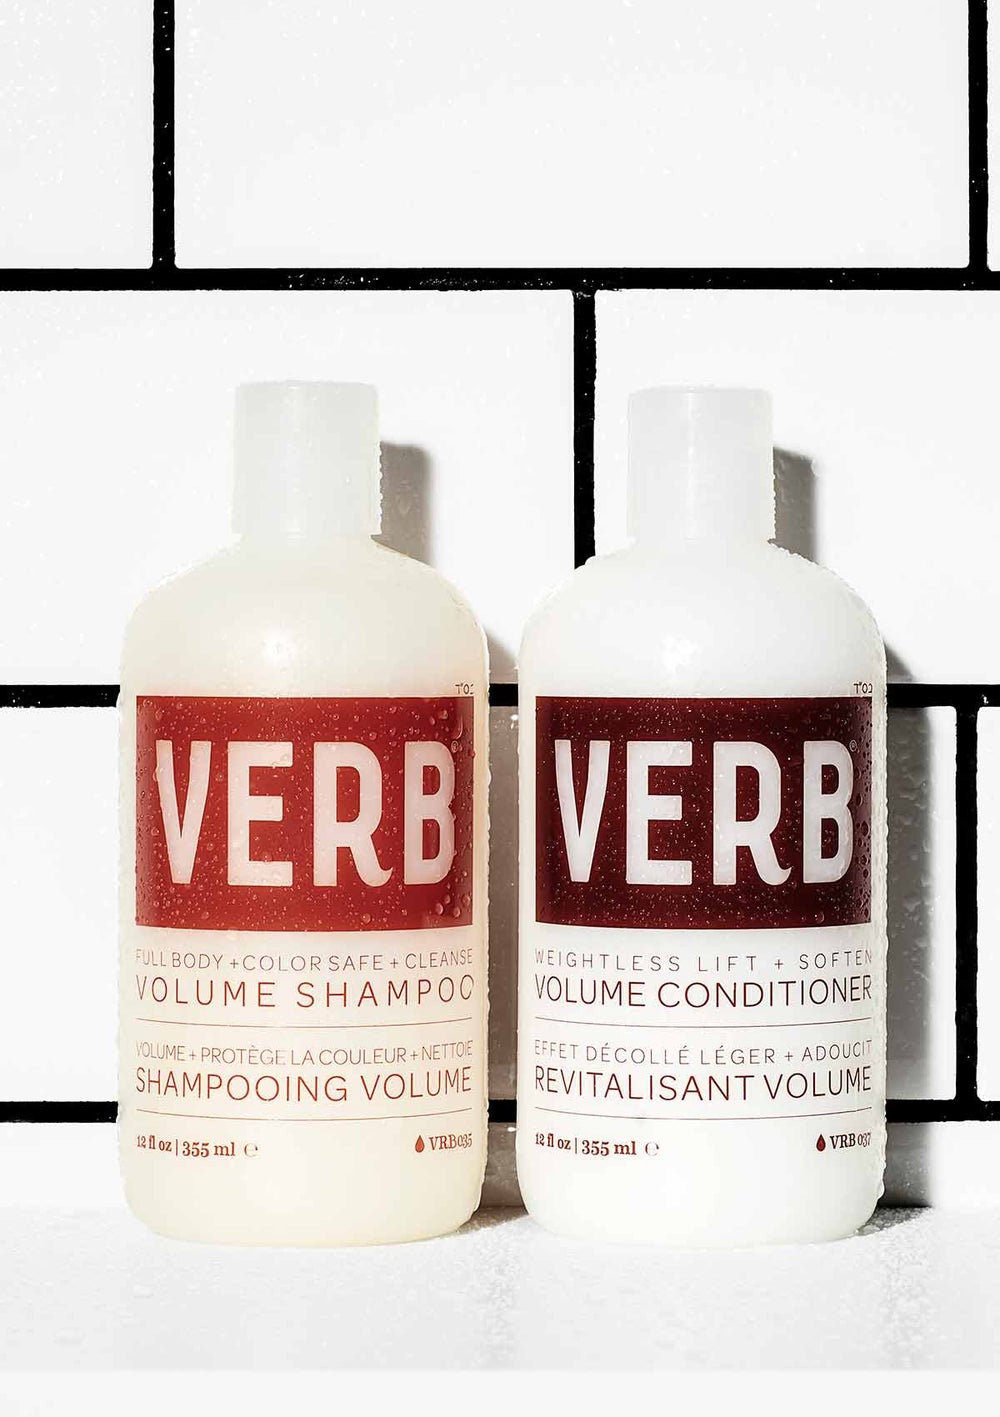 Verb - Volume Conditioner Weightless Lift + Soften |12 oz| - by Verb |ProCare Outlet|